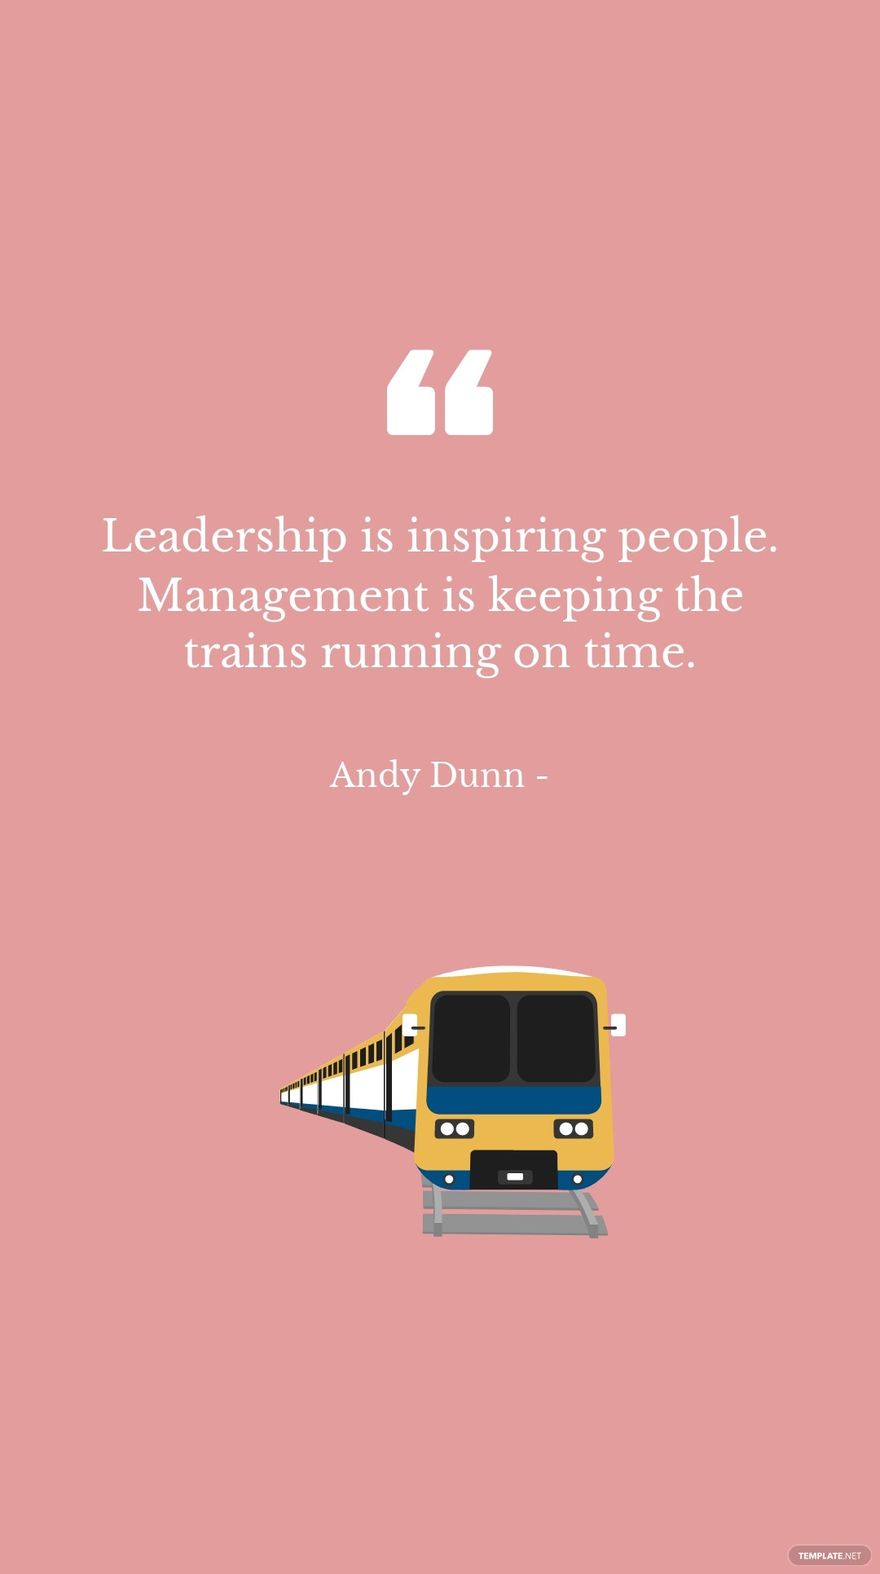 Free Andy Dunn - Leadership is inspiring people. Management is keeping the trains running on time.